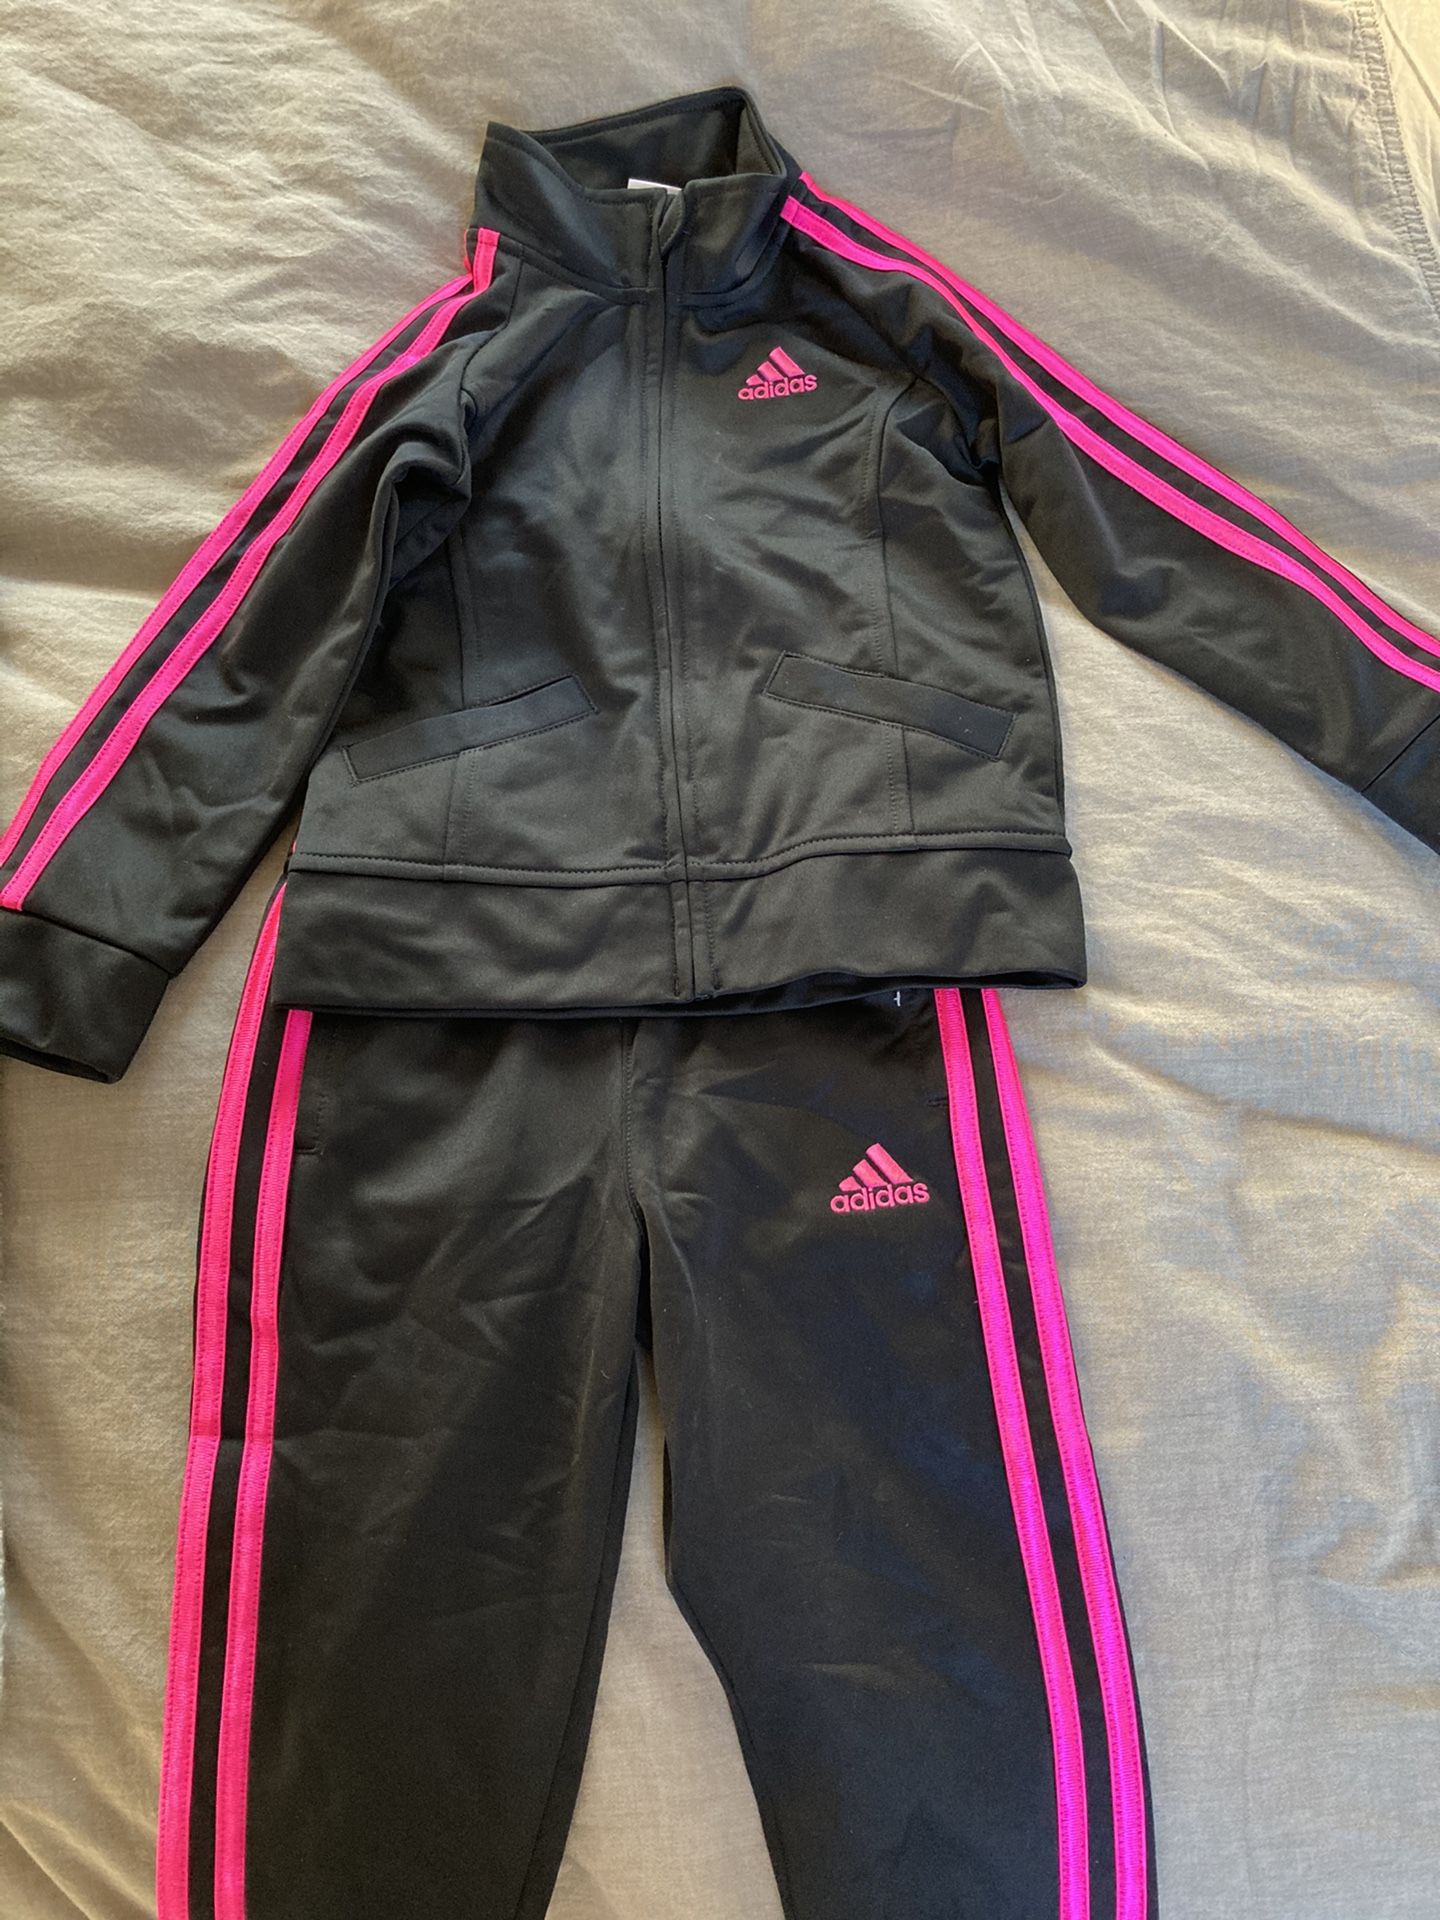 Toddler Adidas Tracksuit - 3T - Black With Pink Stripes